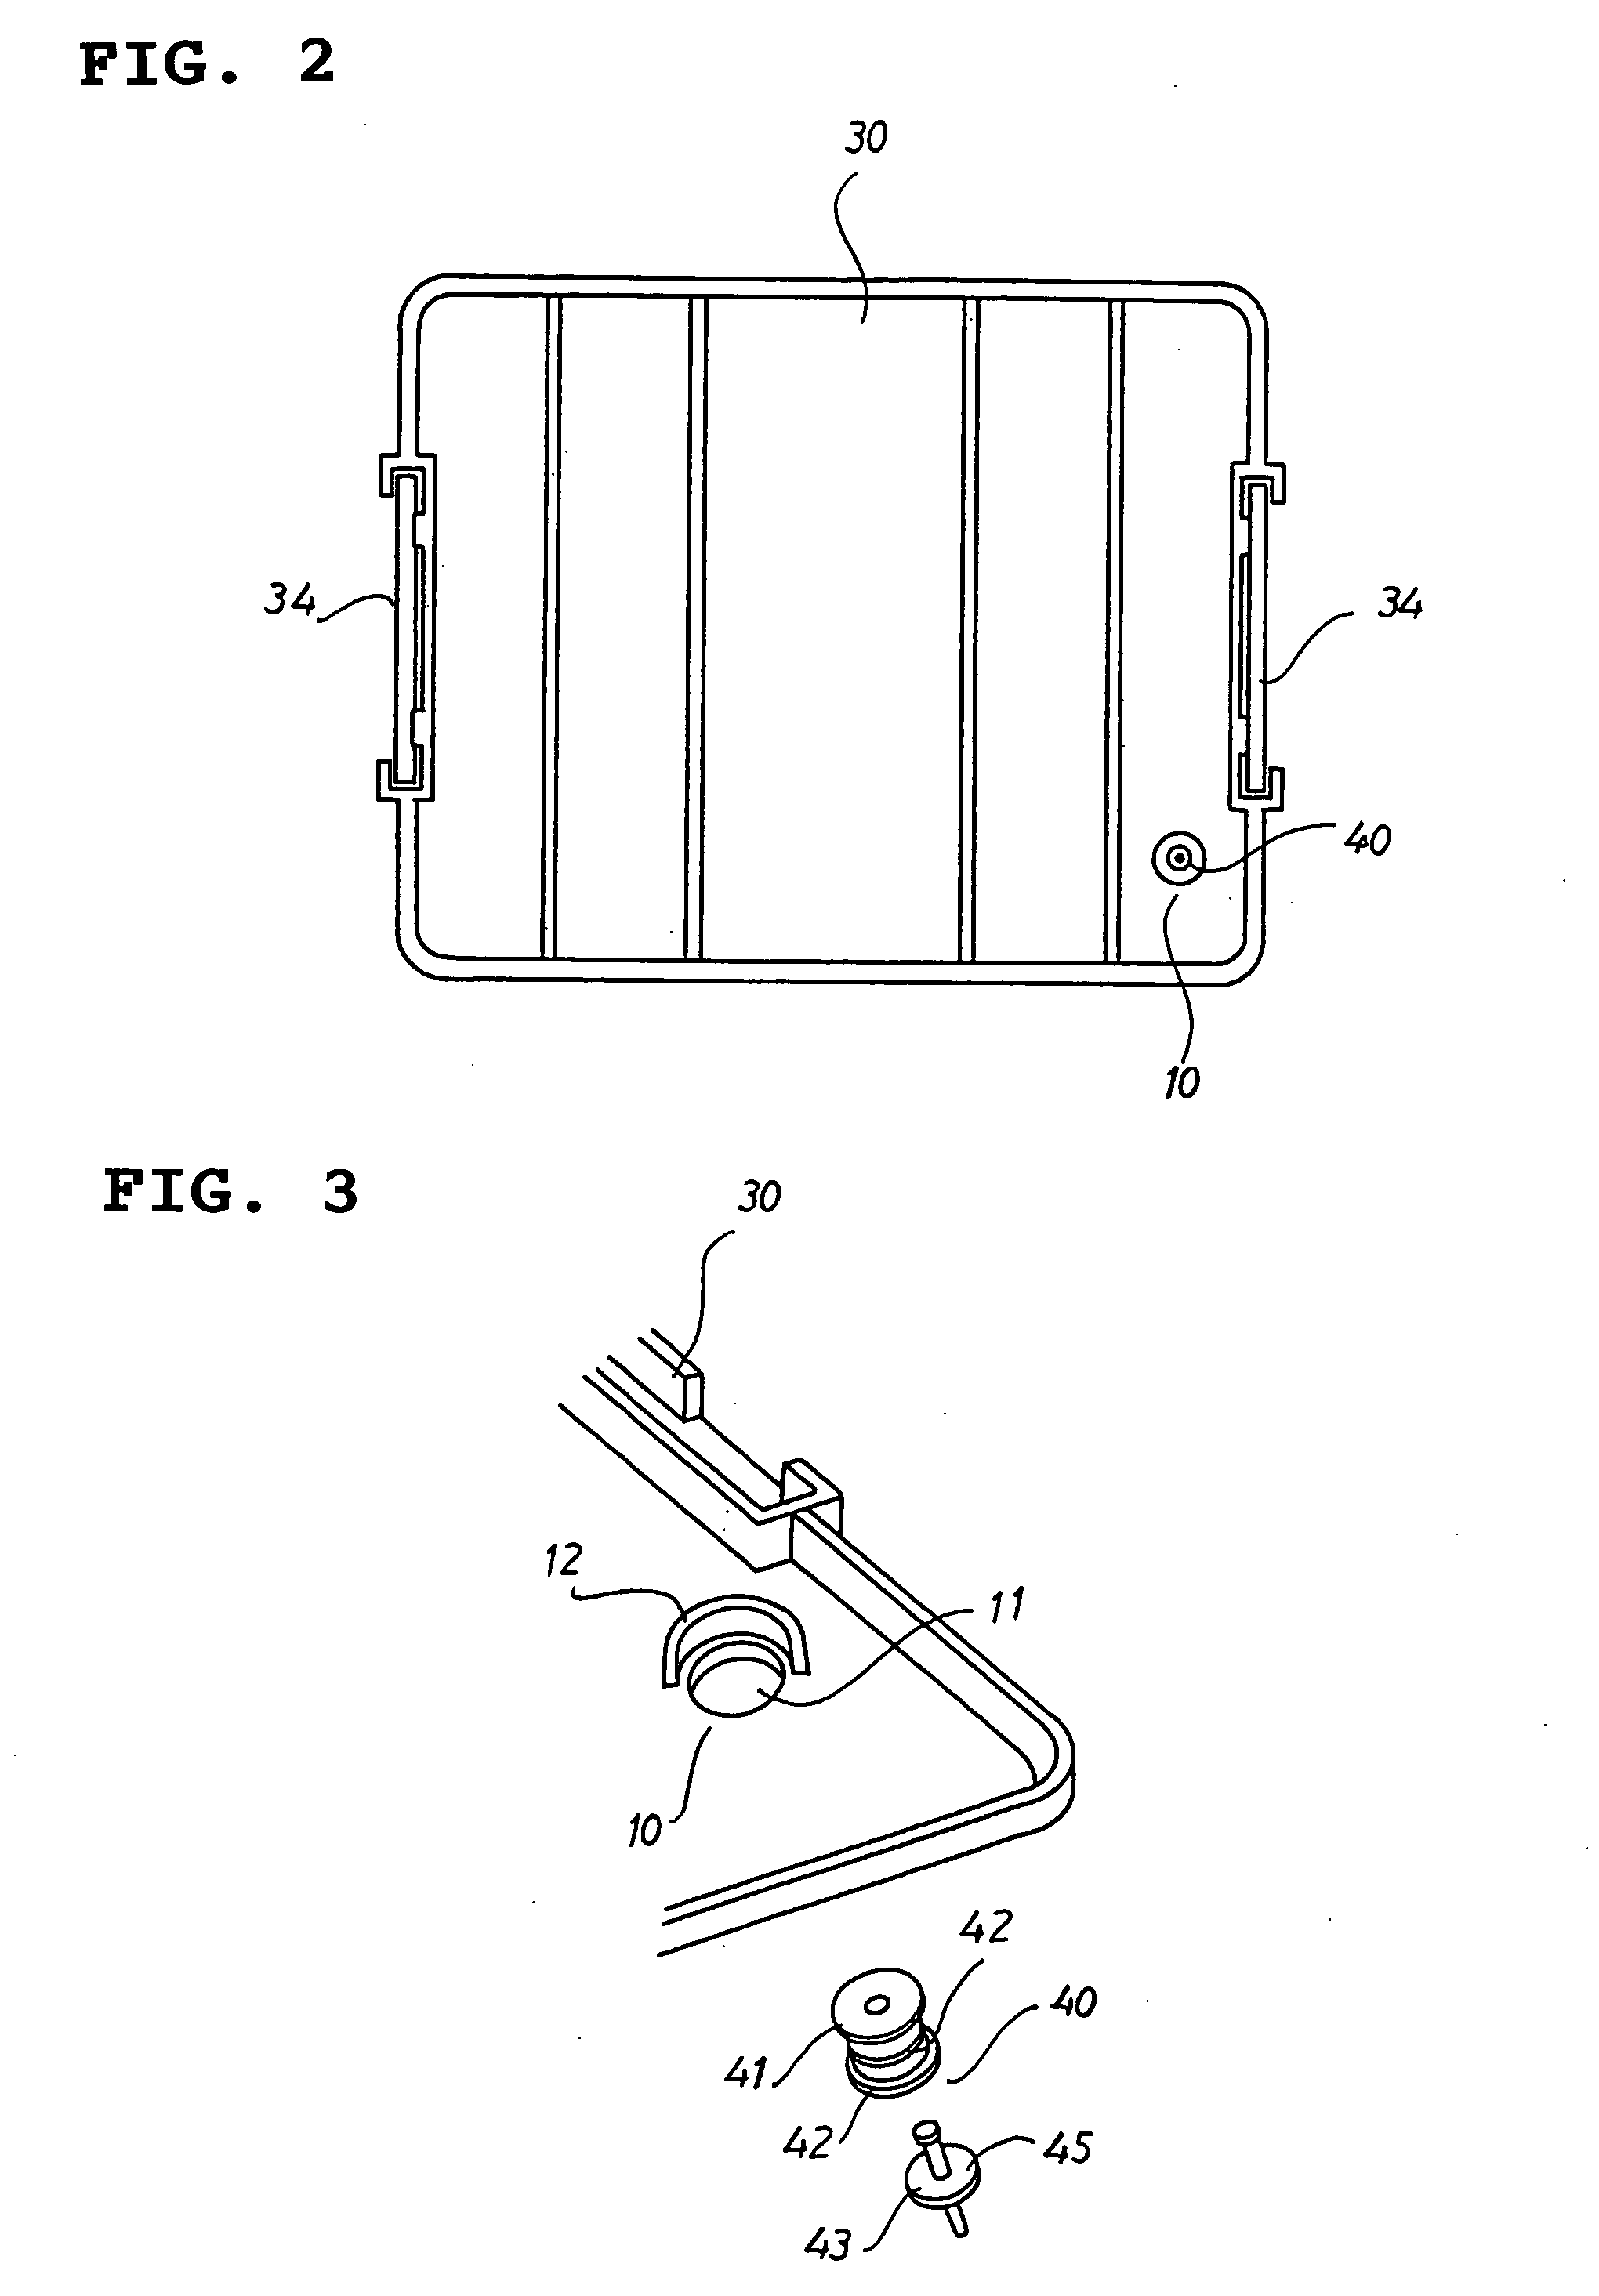 Substrate-storing container